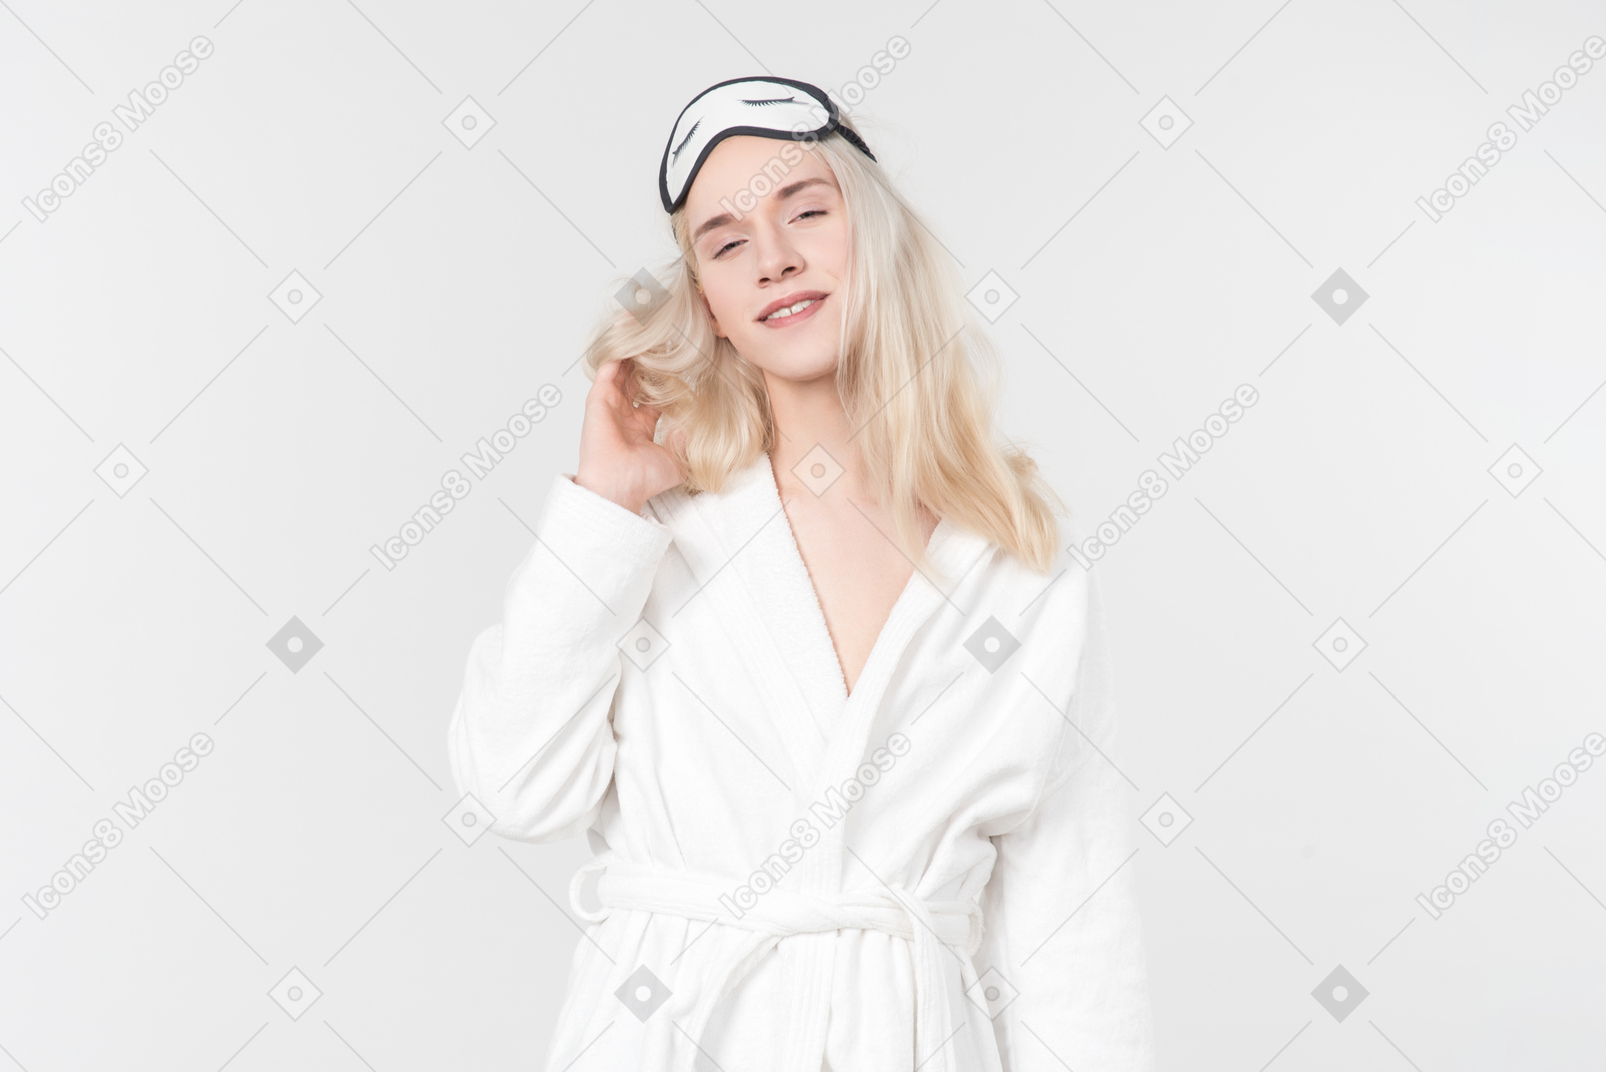 Young blond-haired man in a white bathrobe going about his morning routine